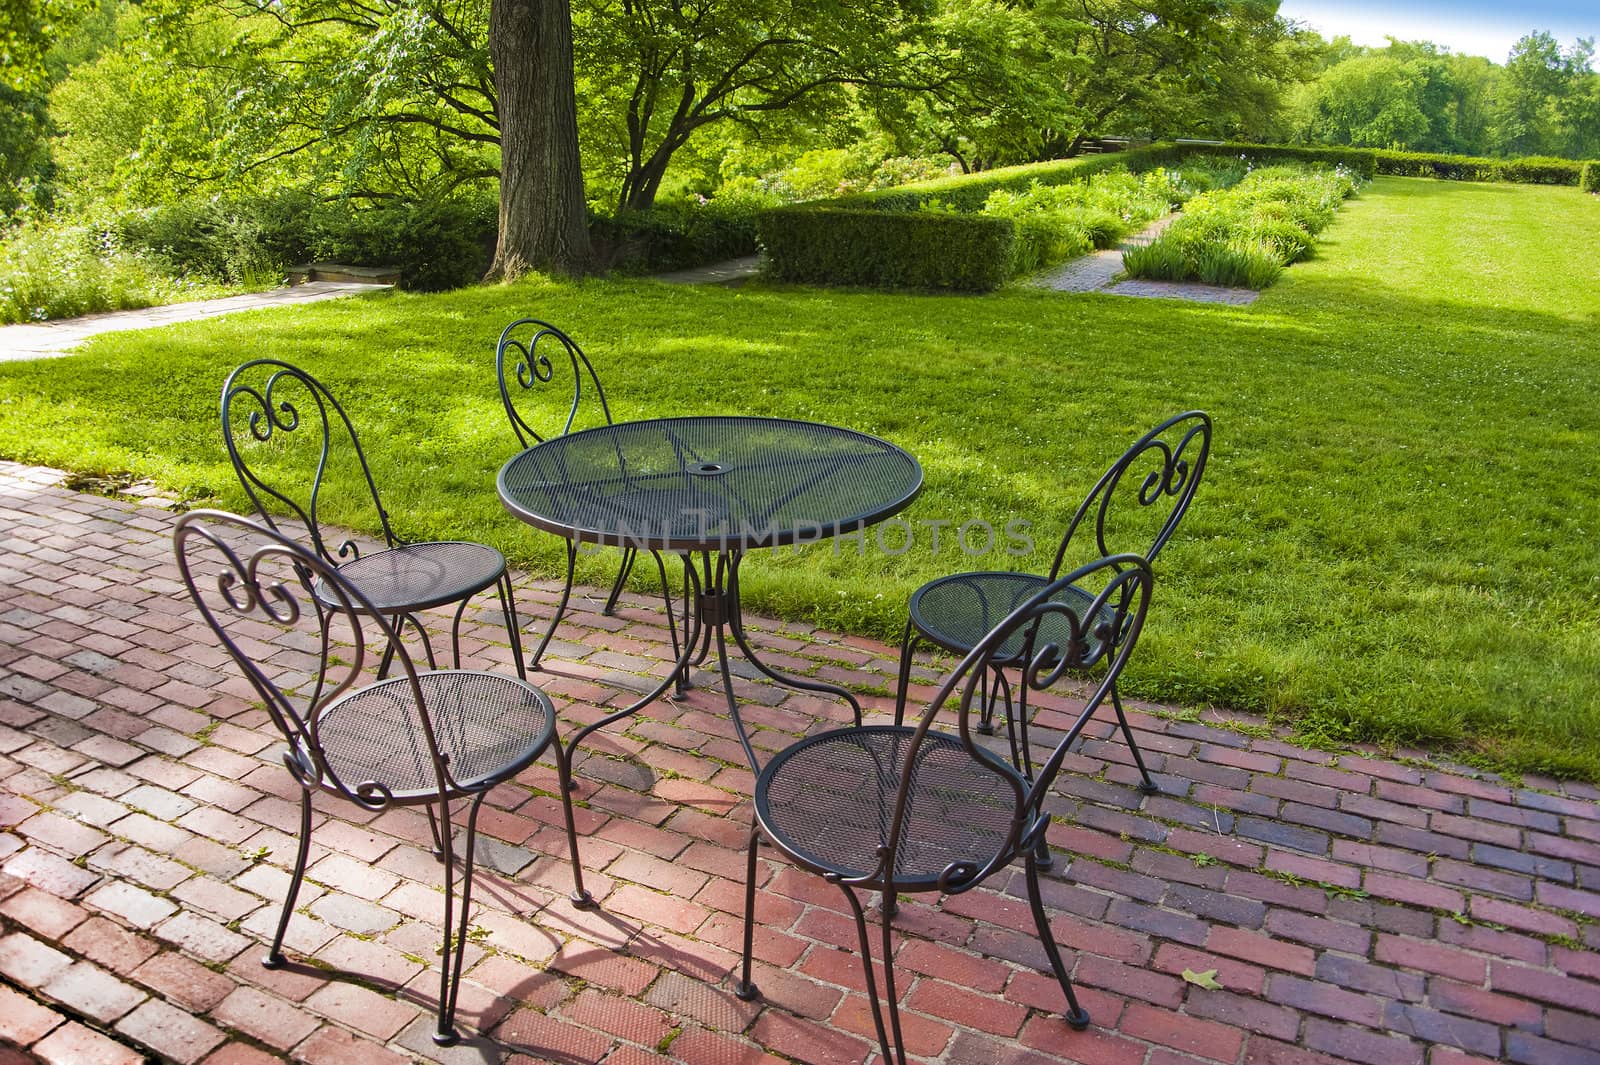 Patio chairs and table overlooking a garden